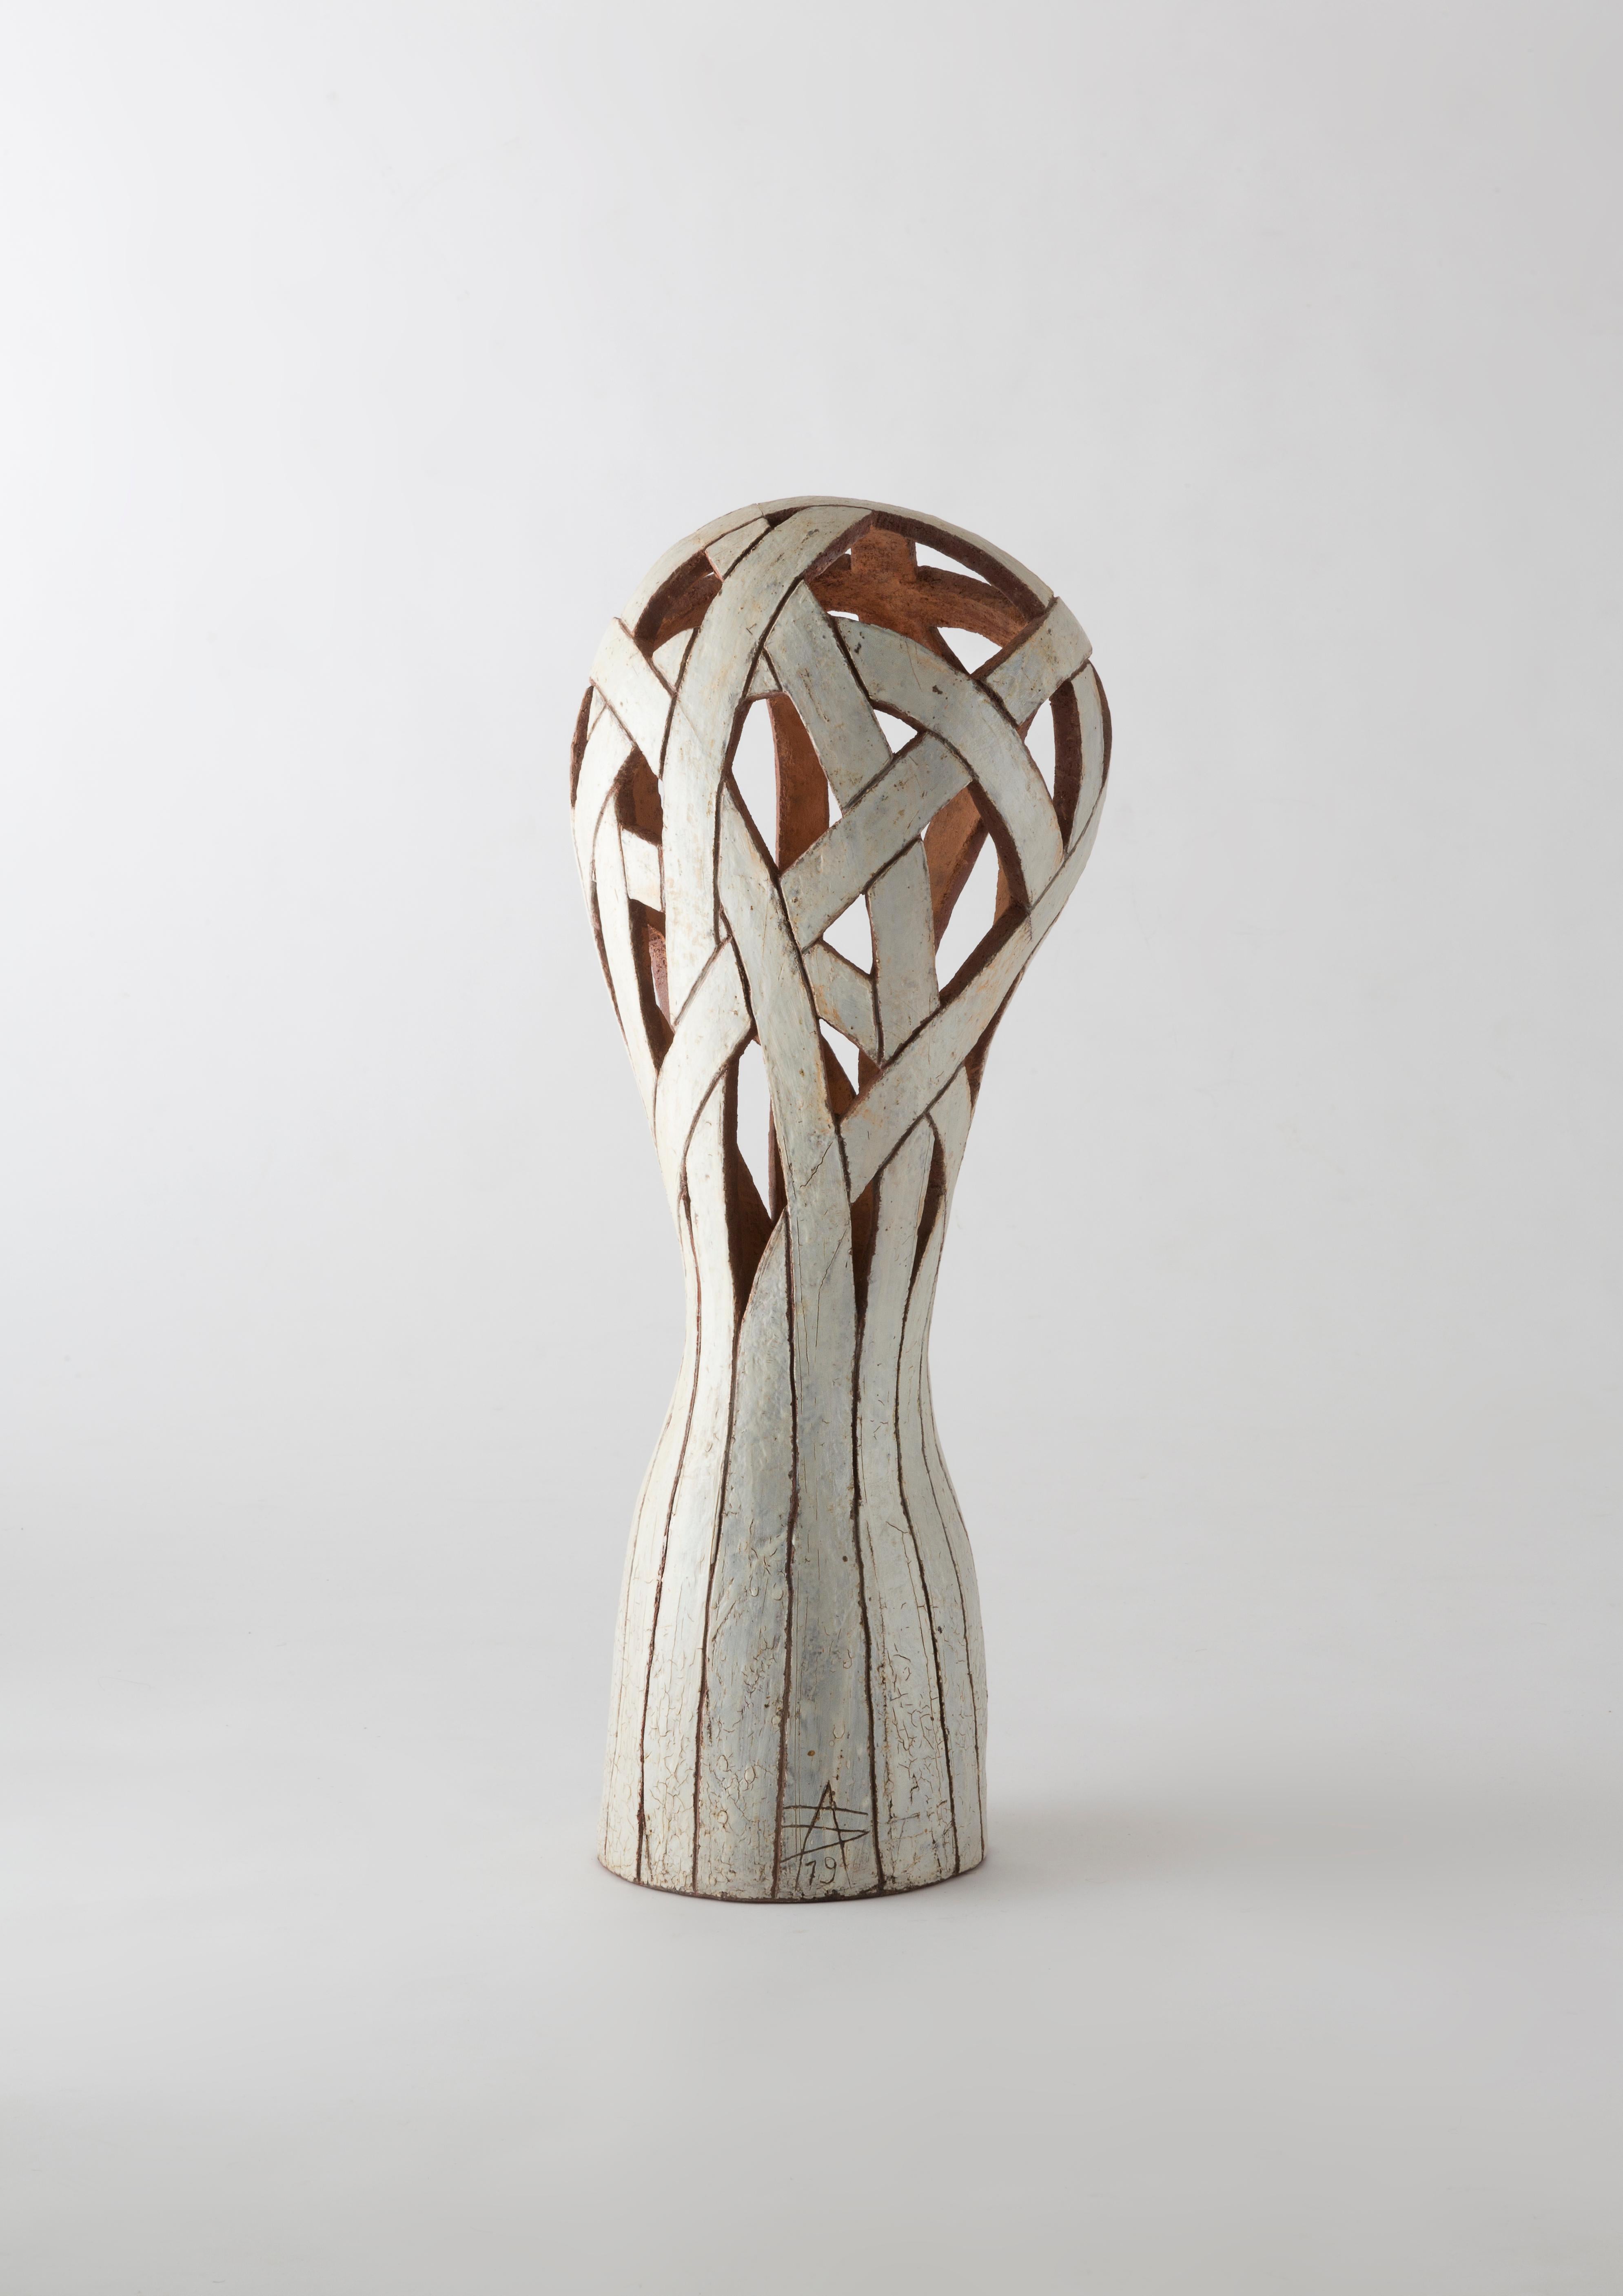 A “Ribbon” lamp by the artist Agnès Debizet in engobe red stoneware. It's a unique piece hand-made by the French ceramist herself in 2019 and monogrammed.